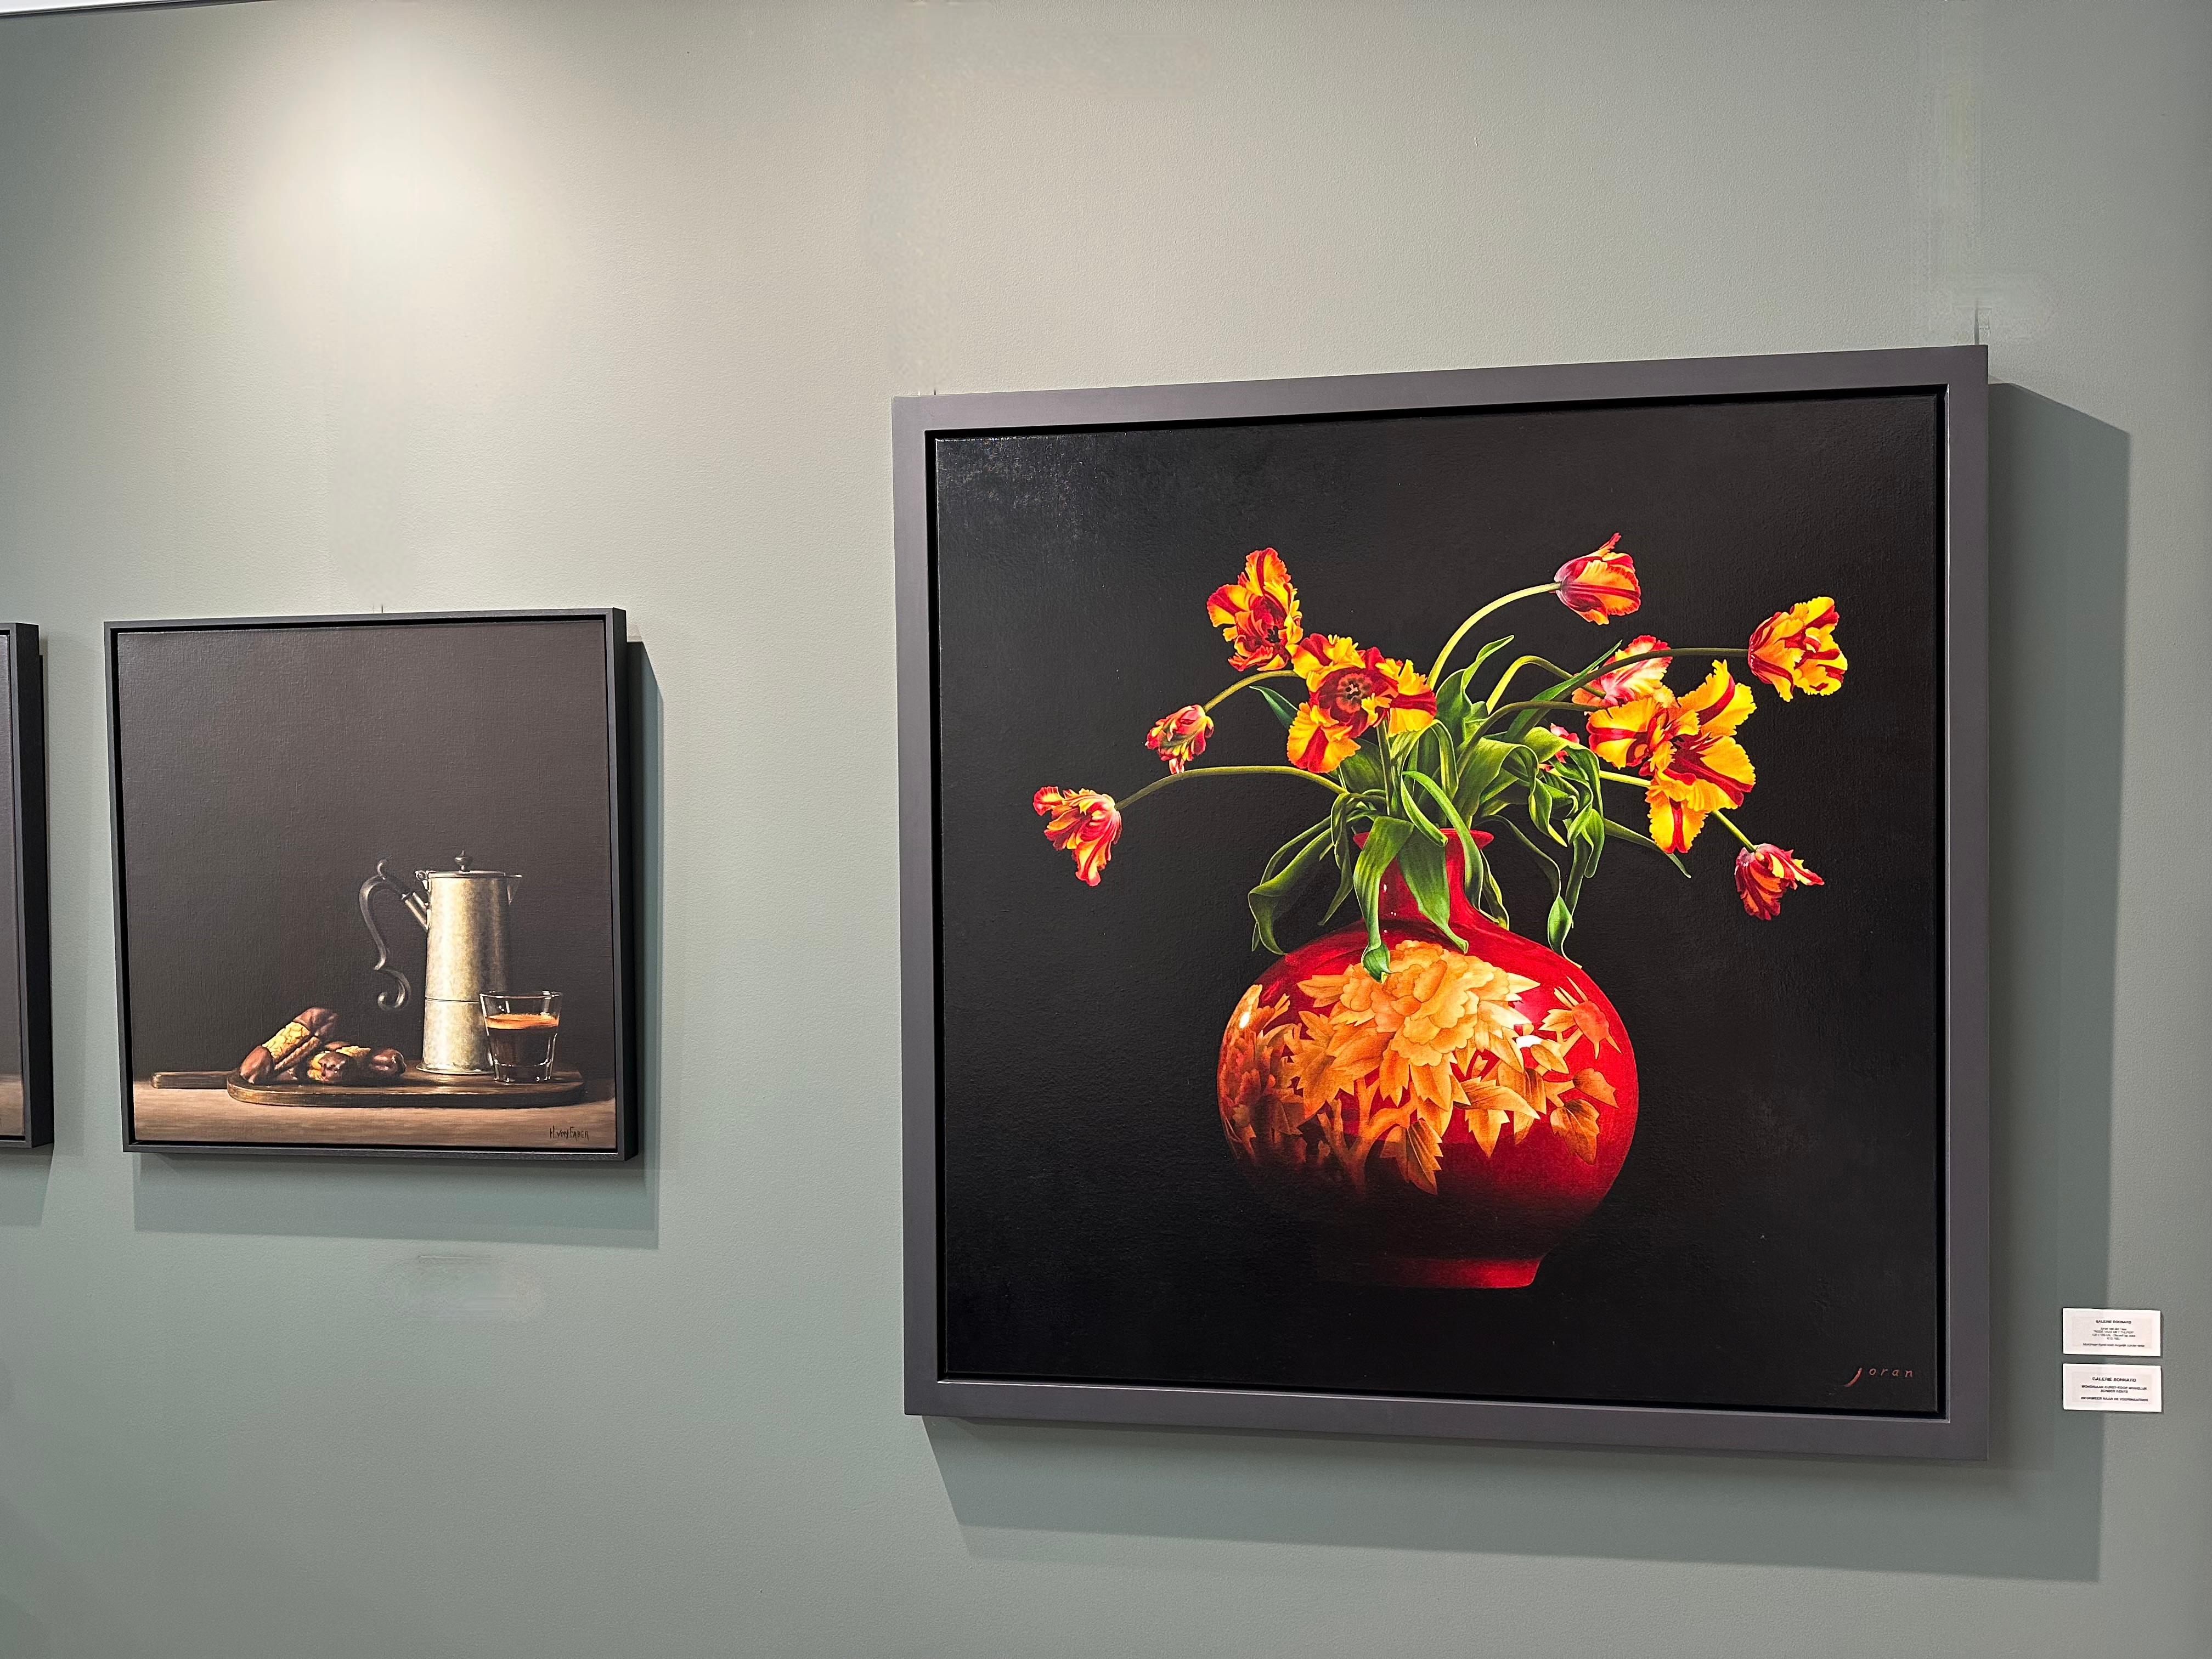 Joran van der Haar
Red vases with Tulips
120 x 120 cm ( framed 130 x 130 cm, frame is included in price)
oil on canvas

The realistic painted 